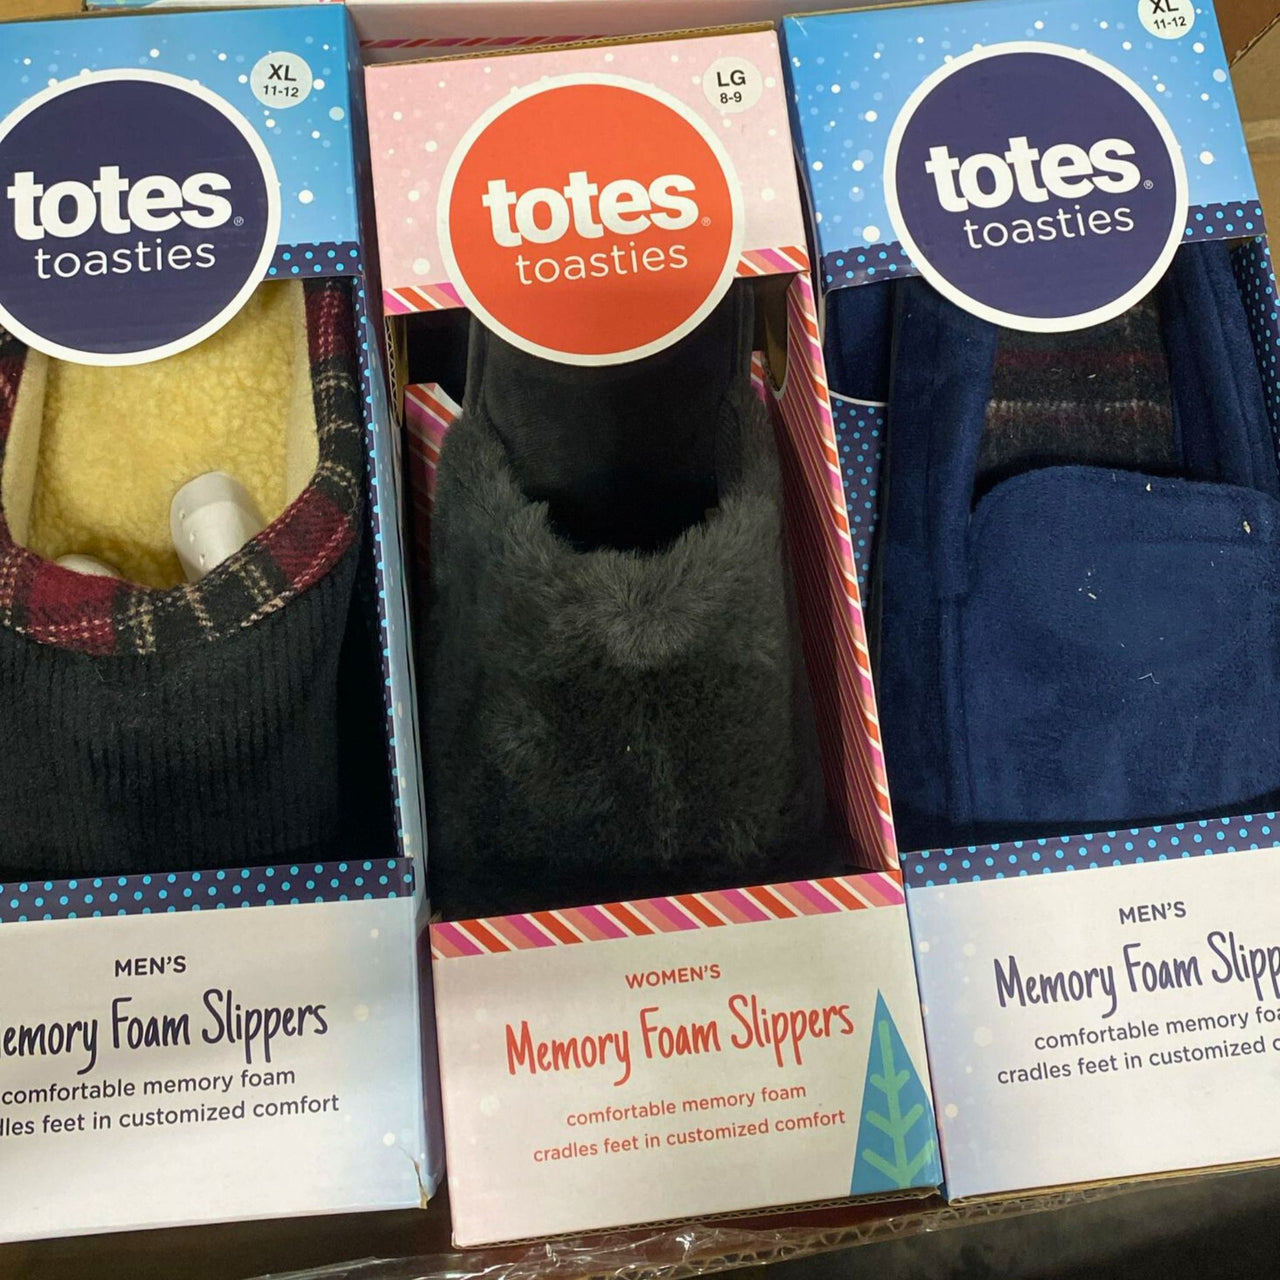 Totes Toasties Women's and Men's, Memory Foam Slippers Sizes Mix 